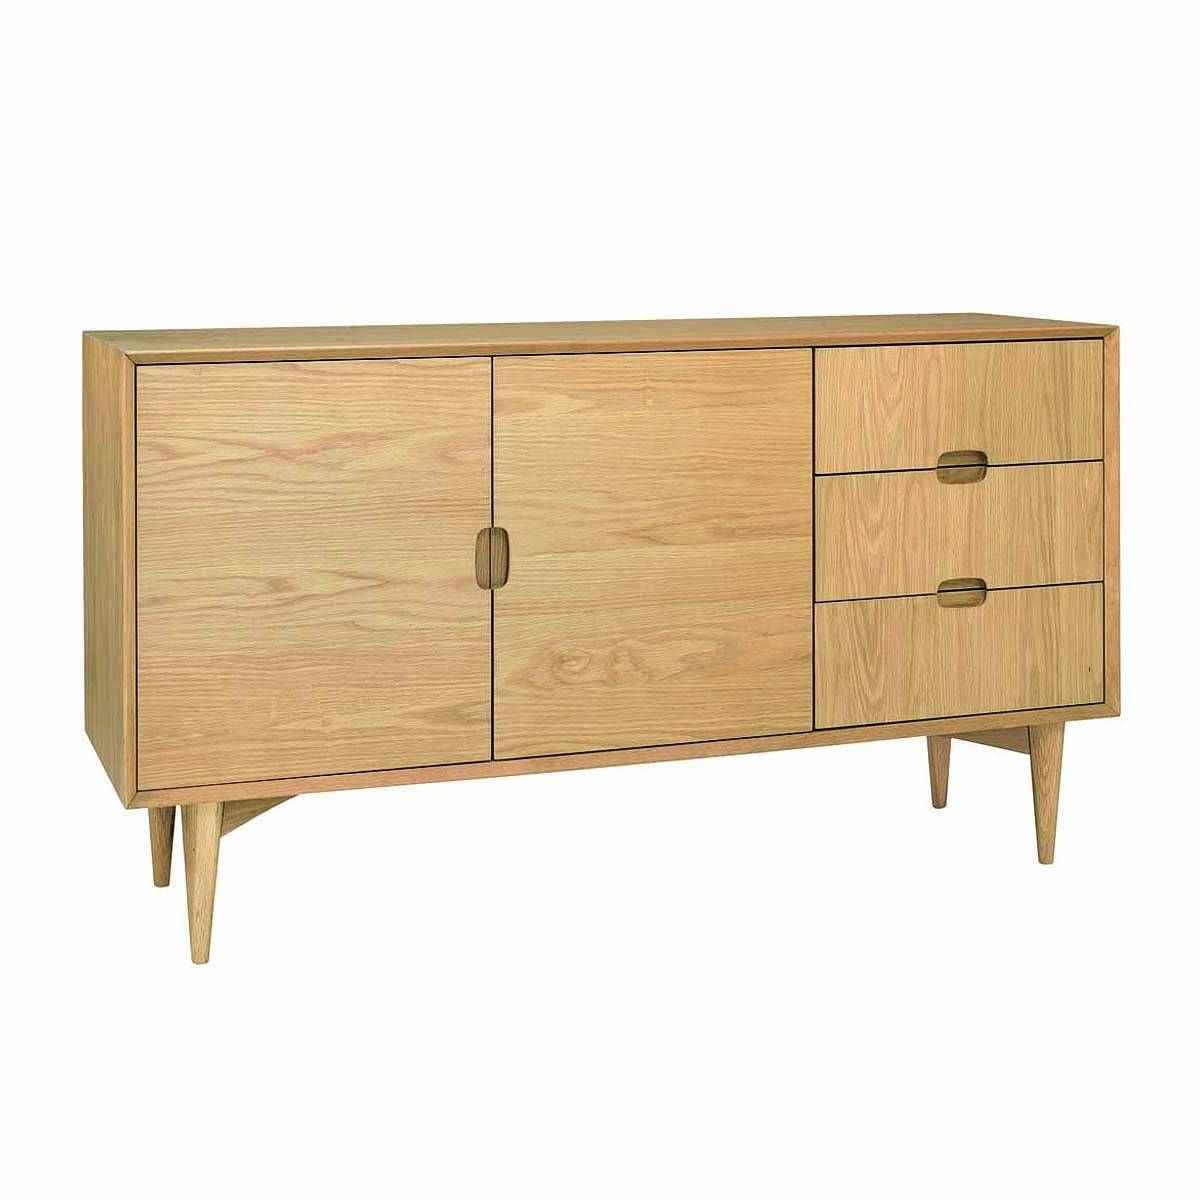 Life Interiors – Stockholm Sideboard (oak) – Modern Sideboards For With Regard To Sideboards Oak (View 3 of 20)